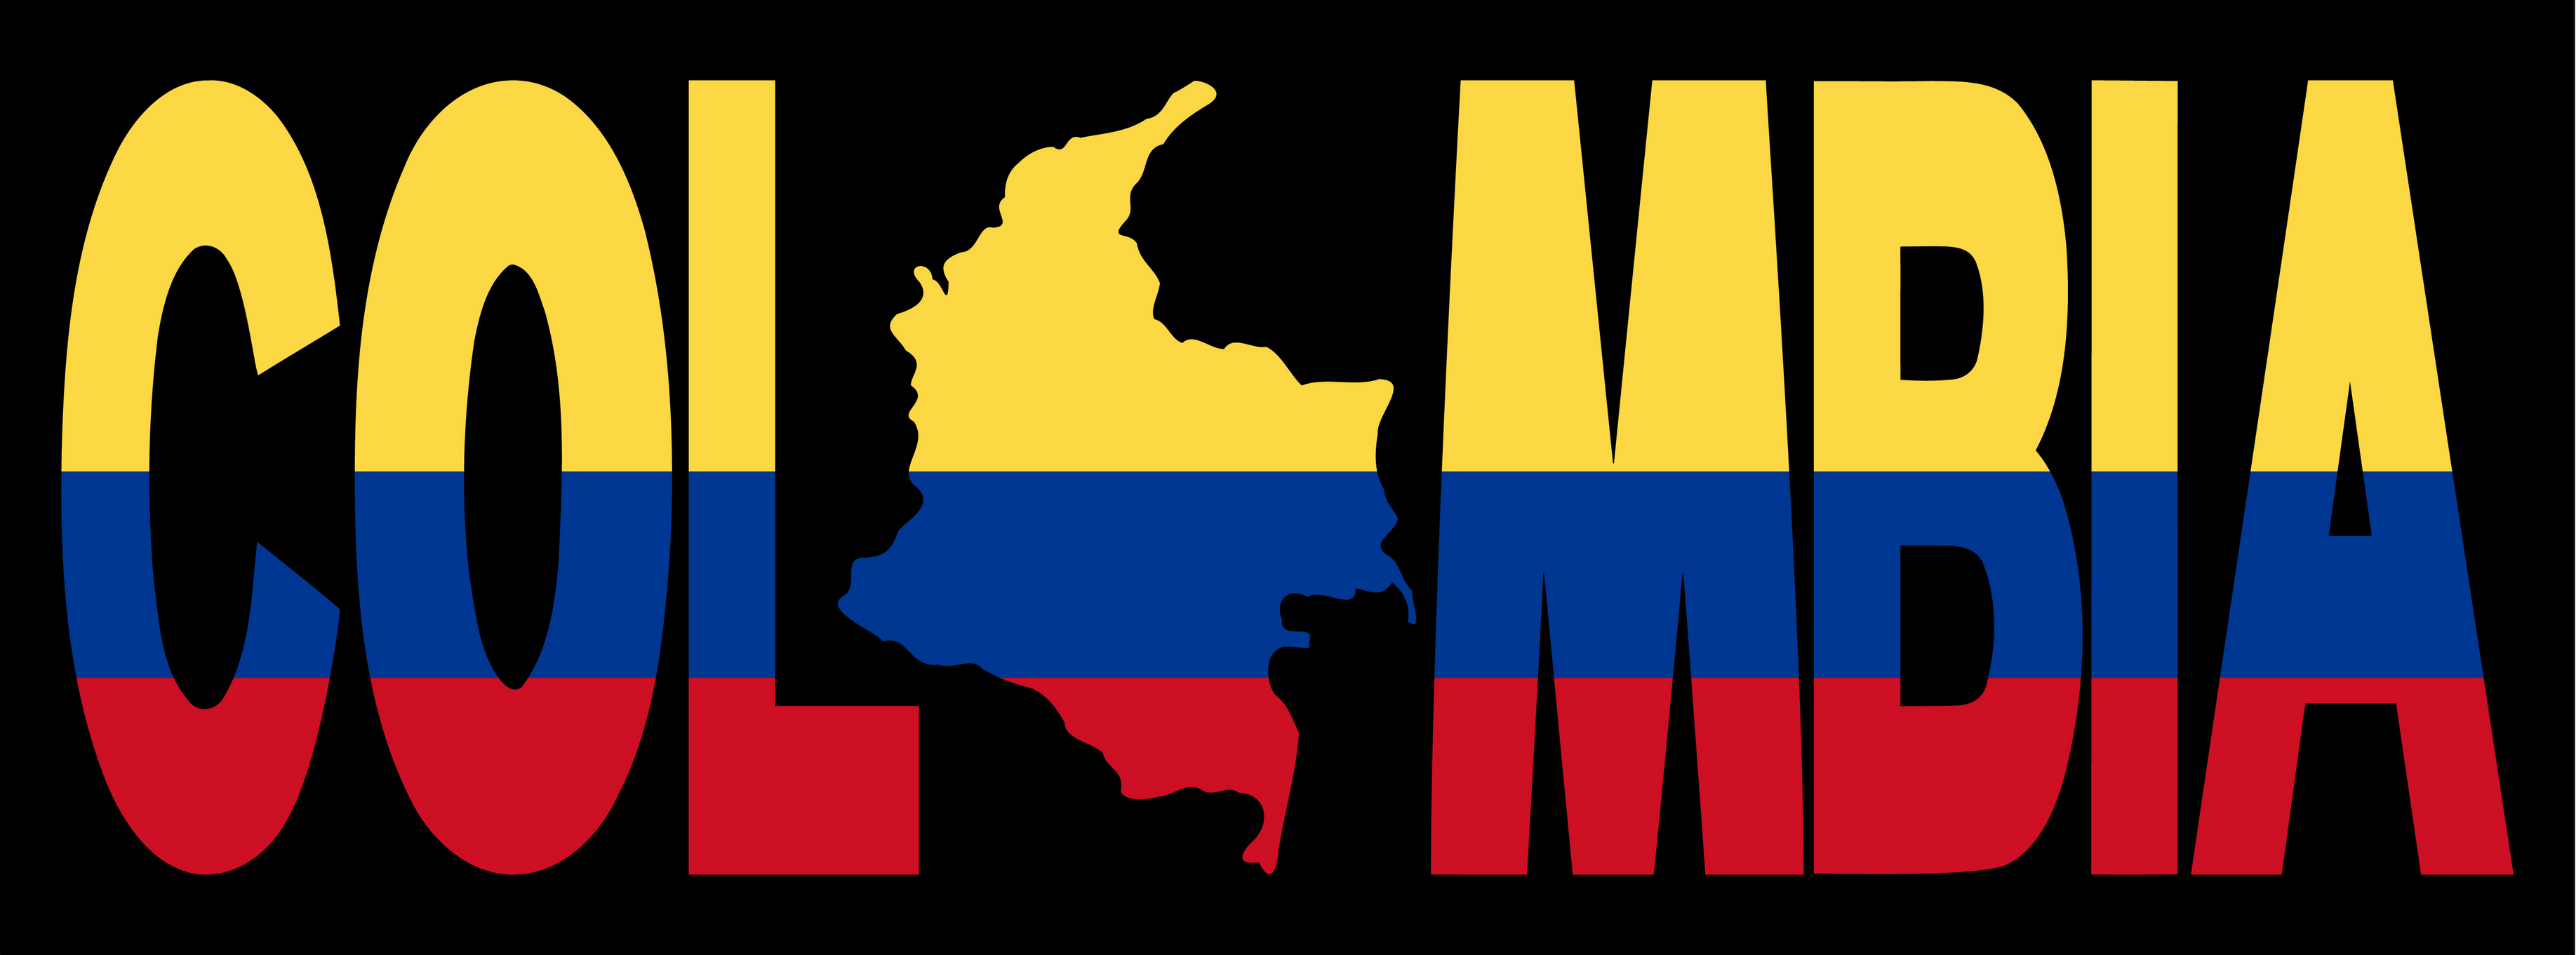 Colombia Wallpaper